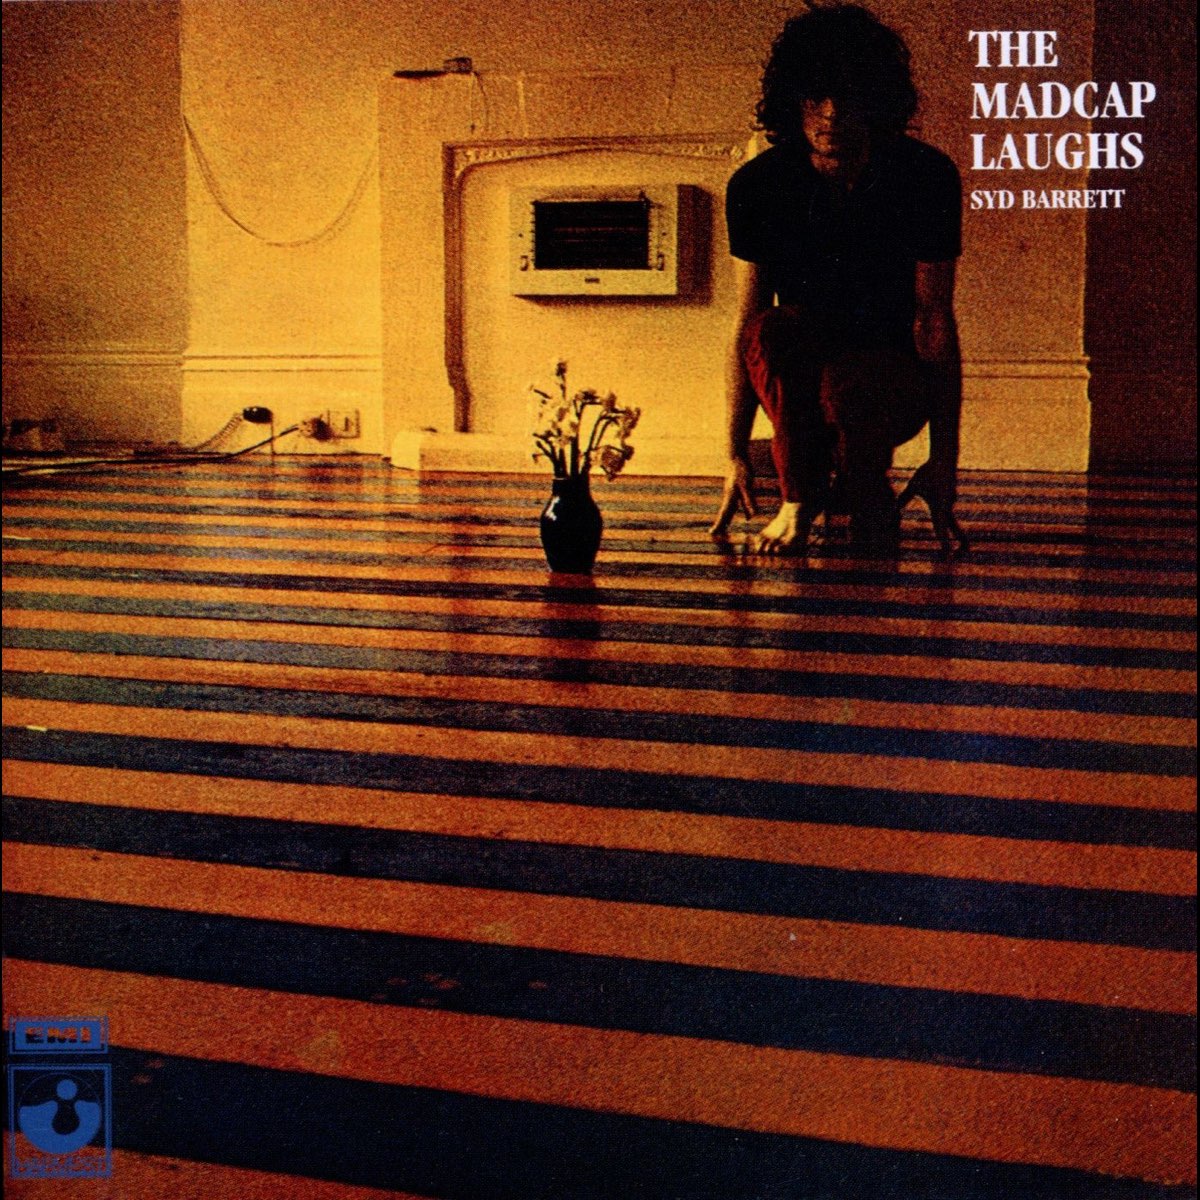 syd-barrett-the-madcap-laughs-cover-hipgnosis